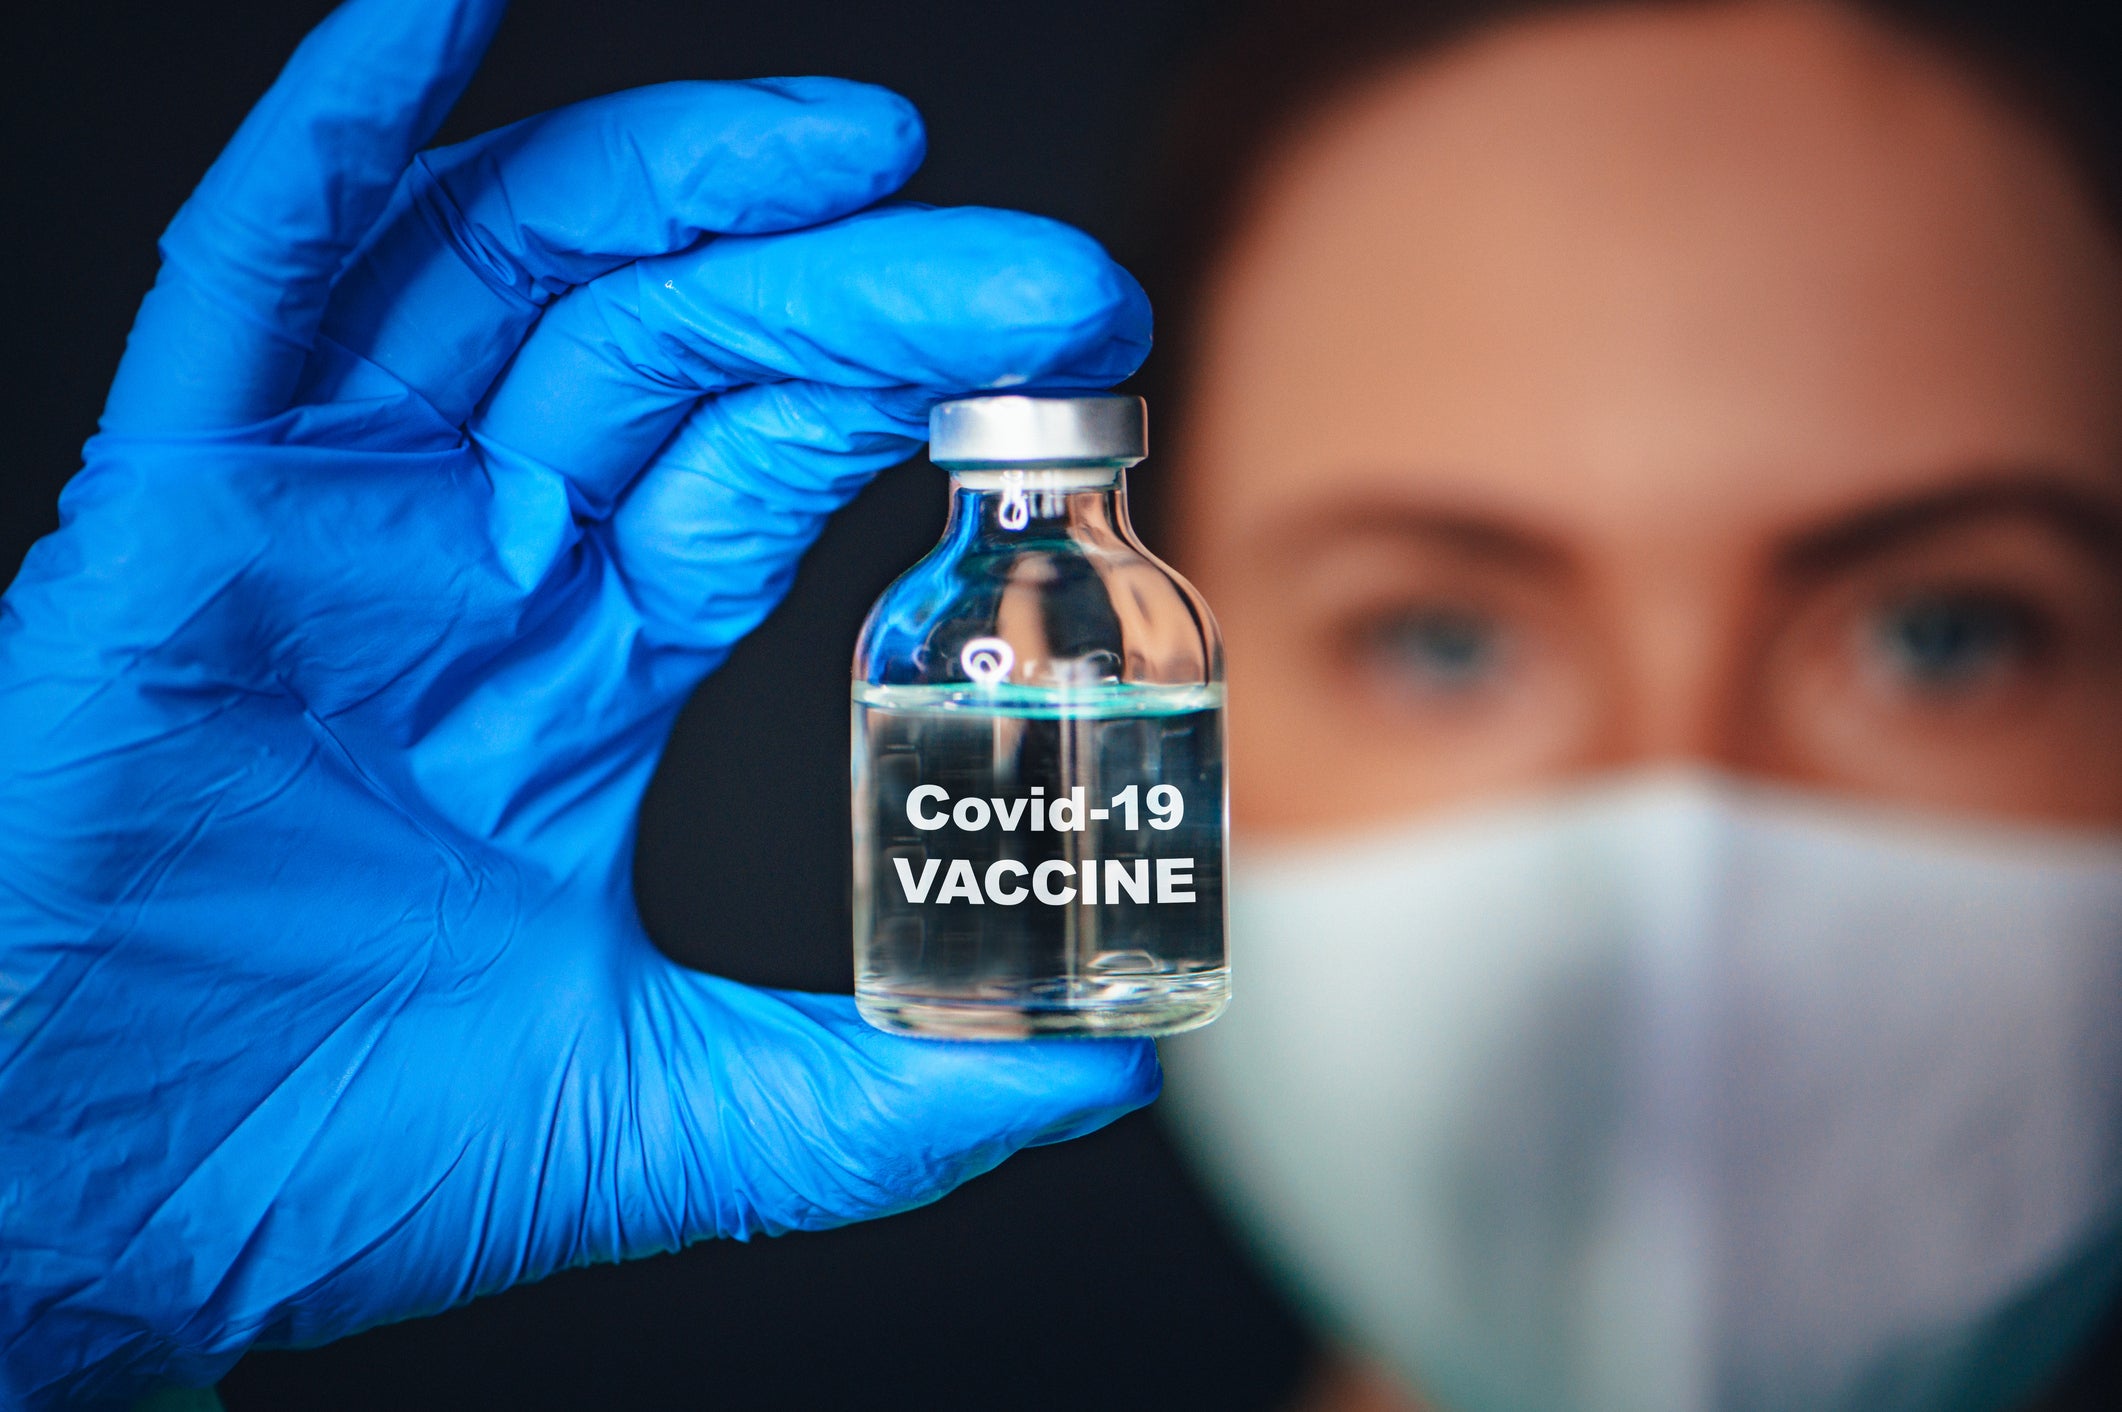 Moderna coronavirus vaccine shows ‘promising’ safety and immune response results in published Phase 1 study, but more research is needed